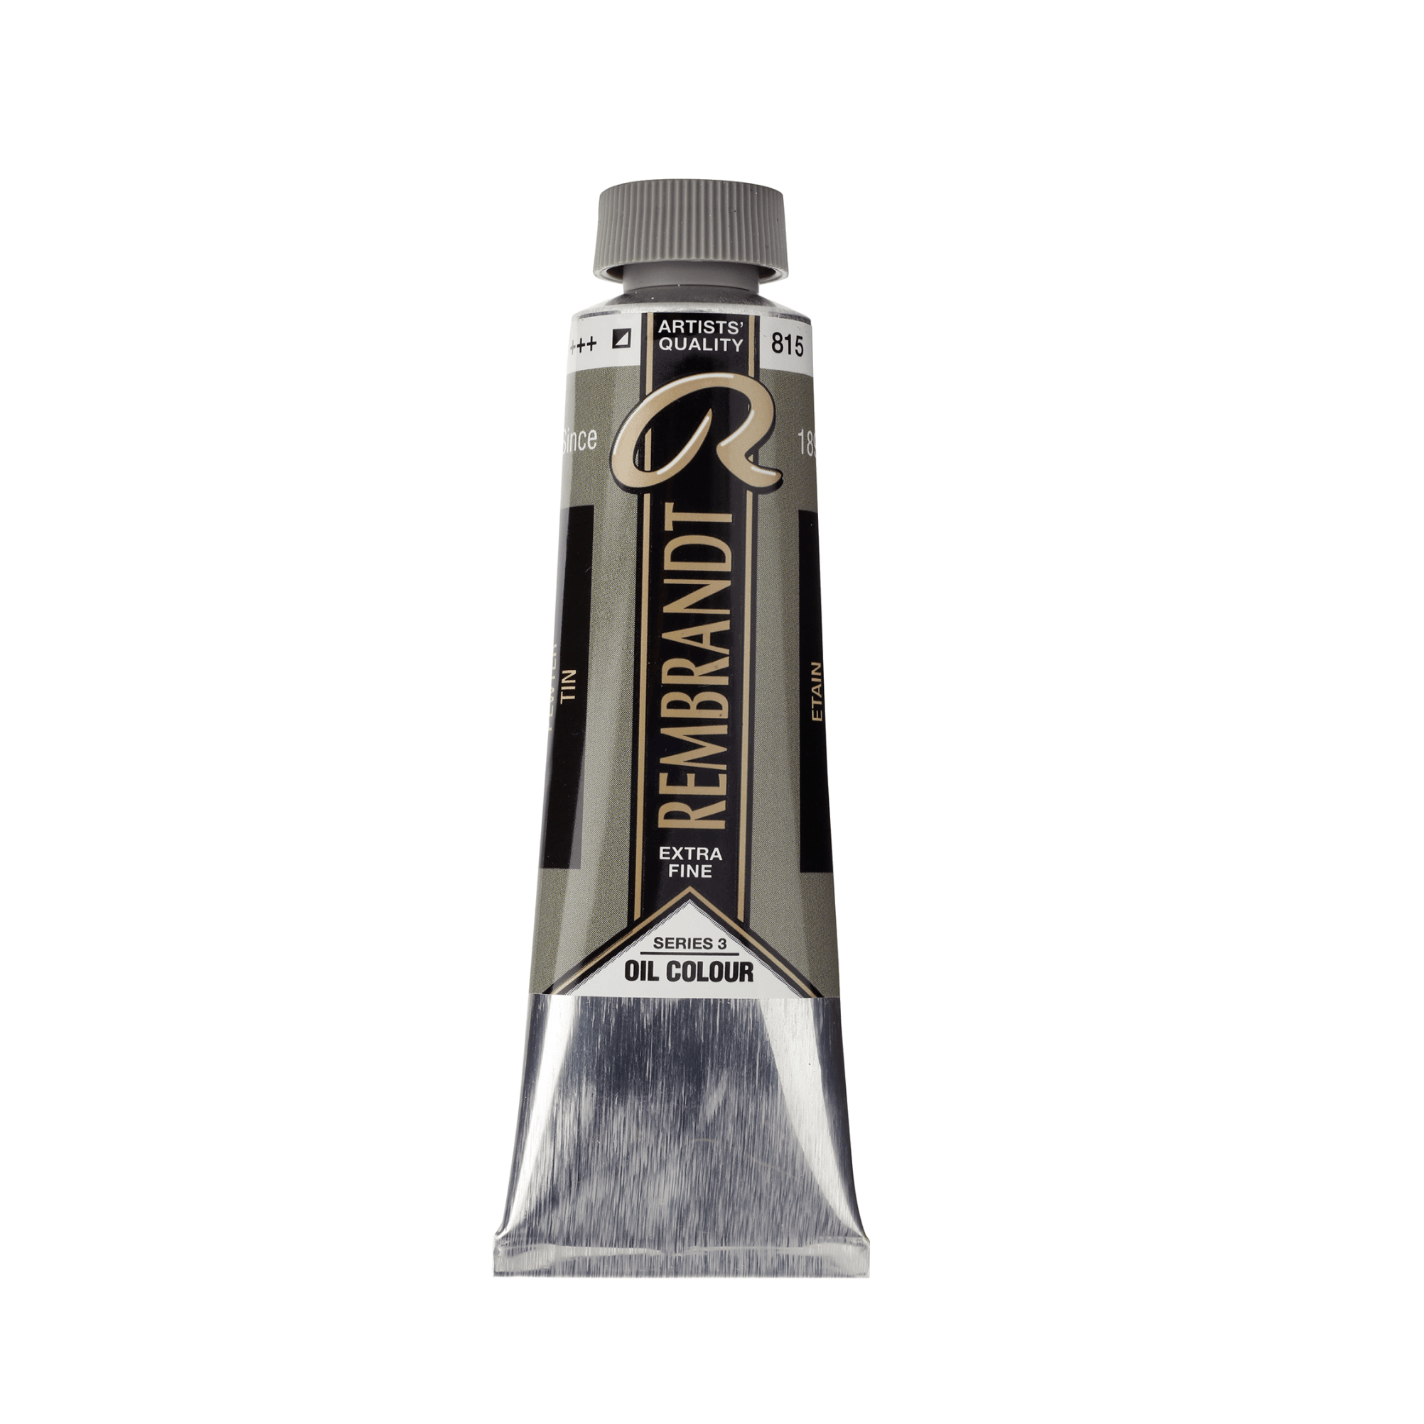 Rembrandt Oliemaling 40ml Pewter